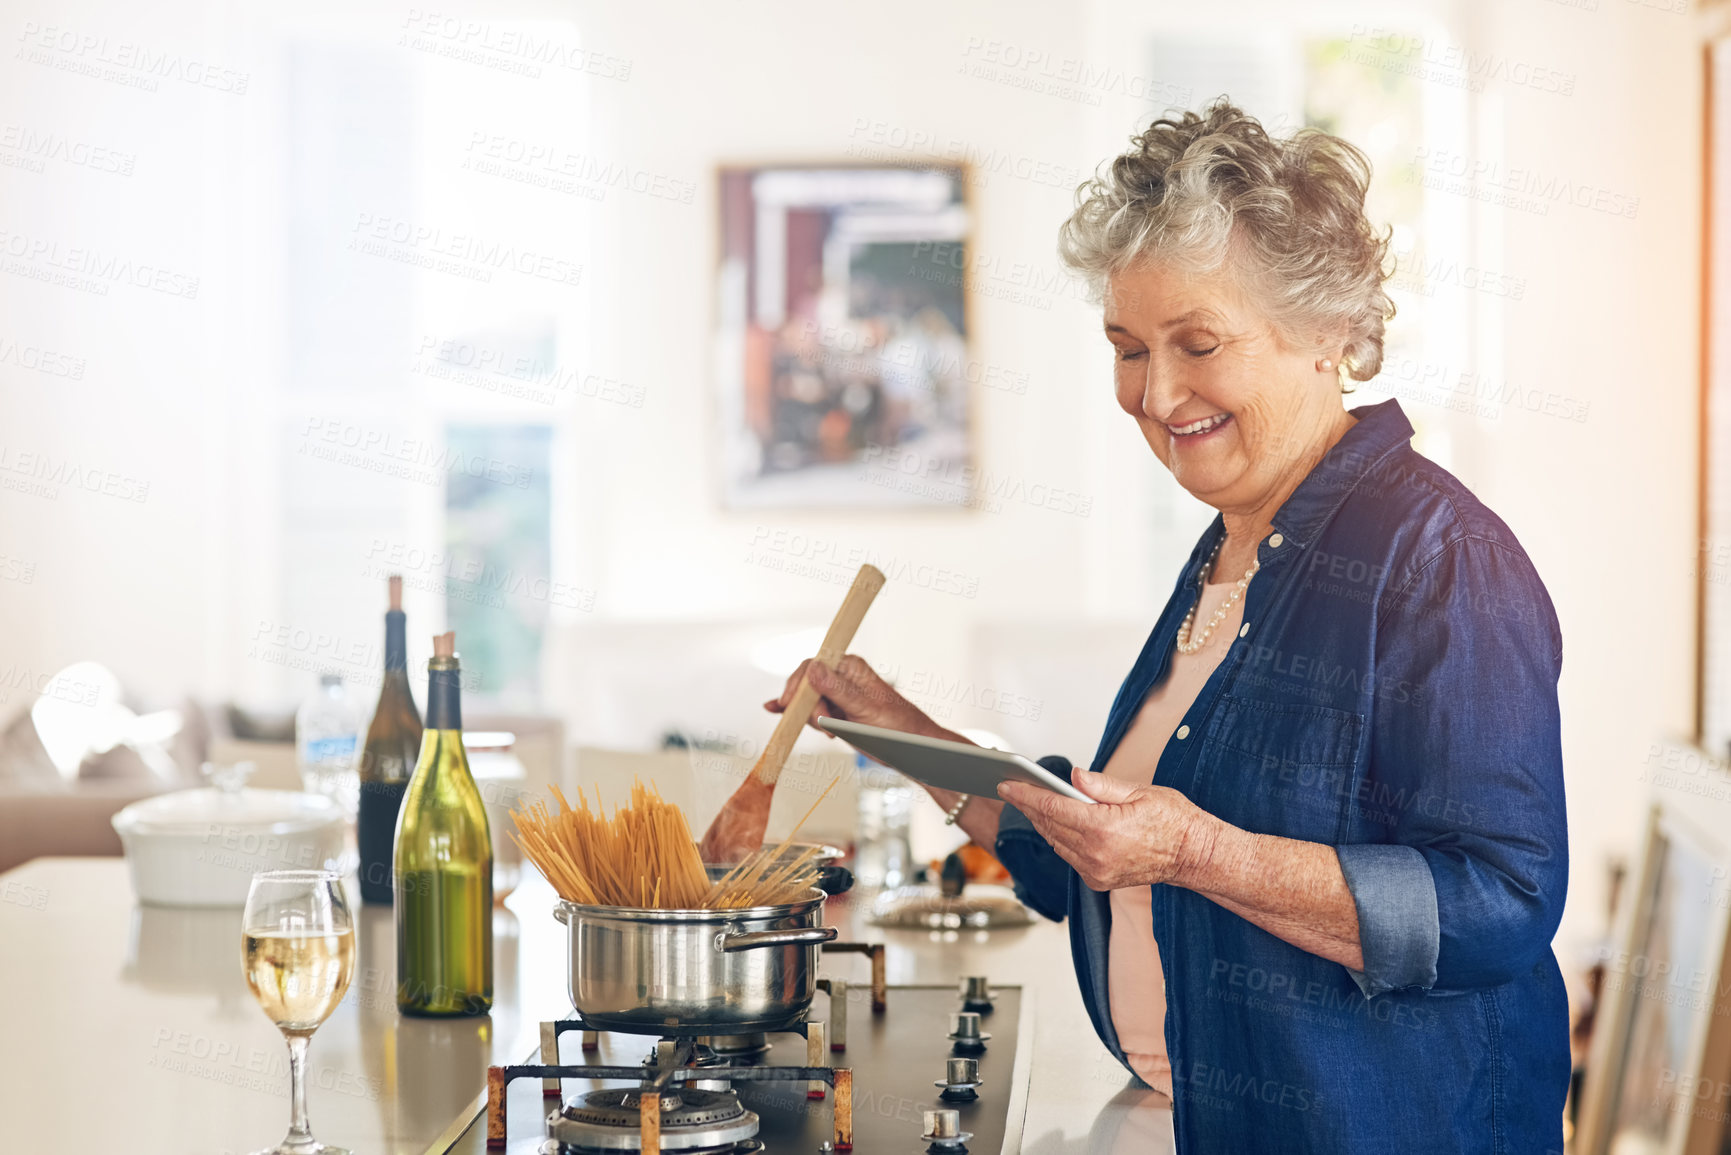 Buy stock photo Cropped shot of a senior woman using a digital tablet while cooking in her kitchen